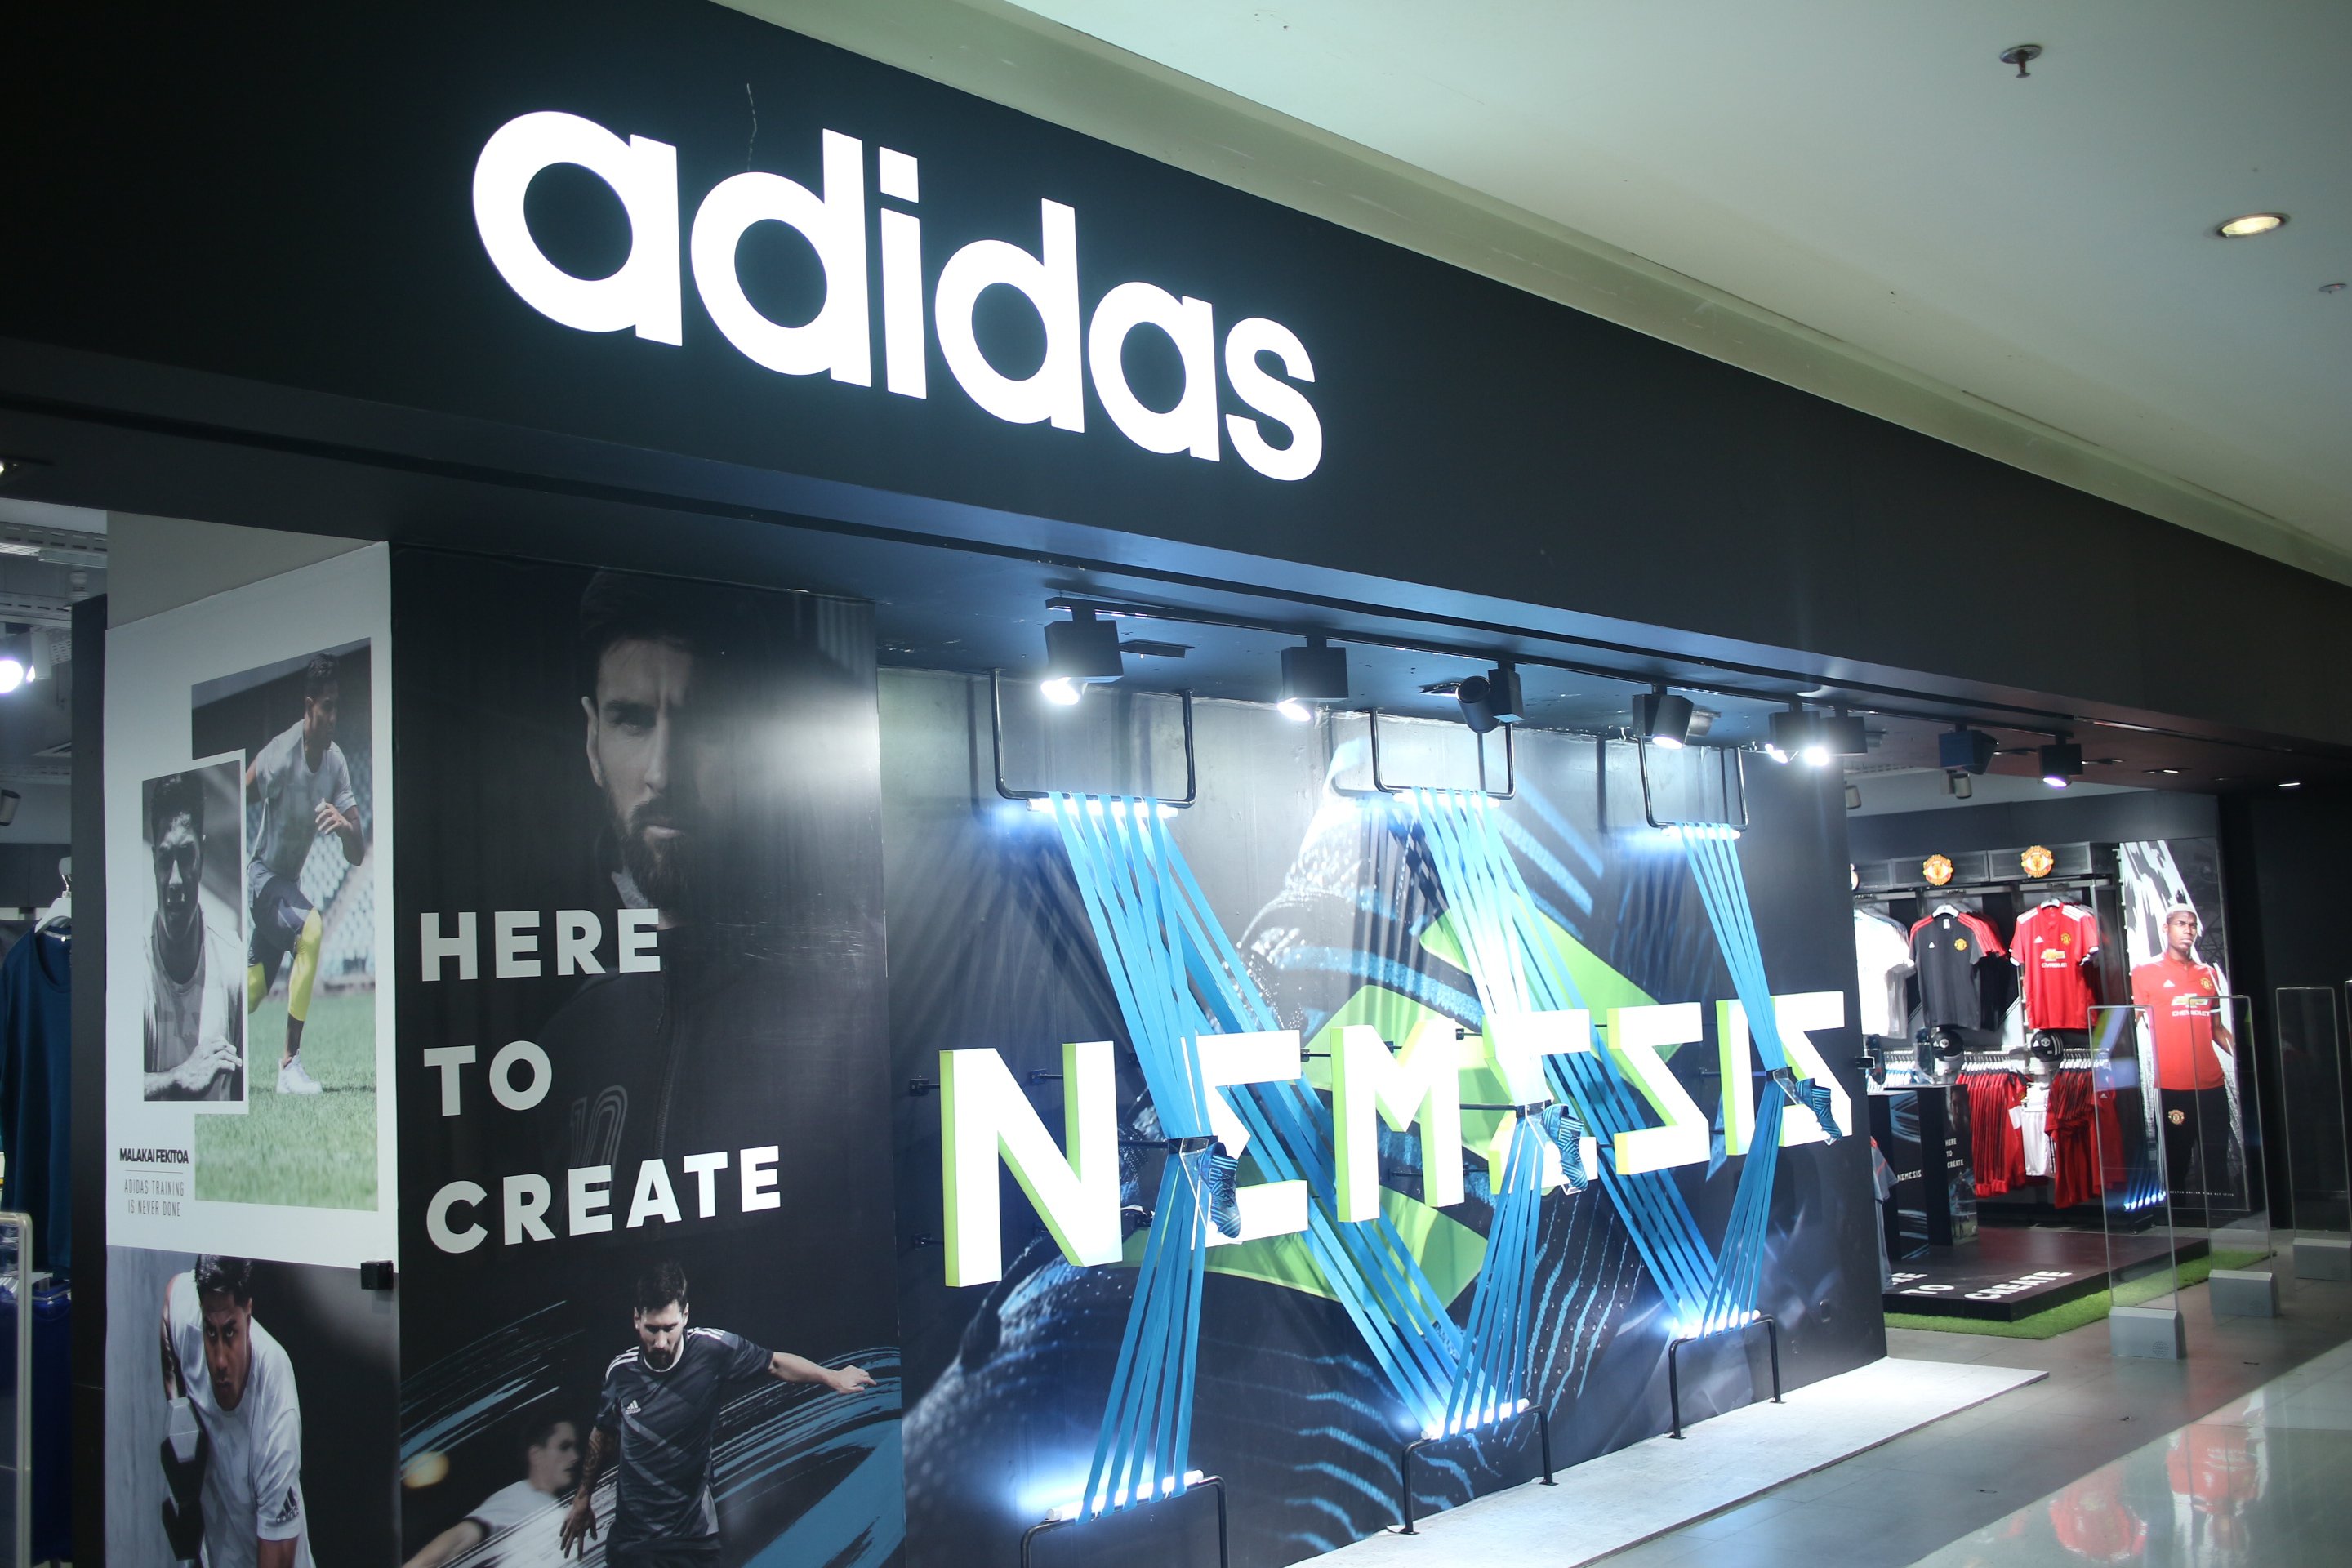 Grand Indonesia on Twitter: "Now open Adidas at Grand Indonesia. Located at Sky Bridge level 2. . #GrandIndonesia https://t.co/b6fdNxh0GV" / Twitter